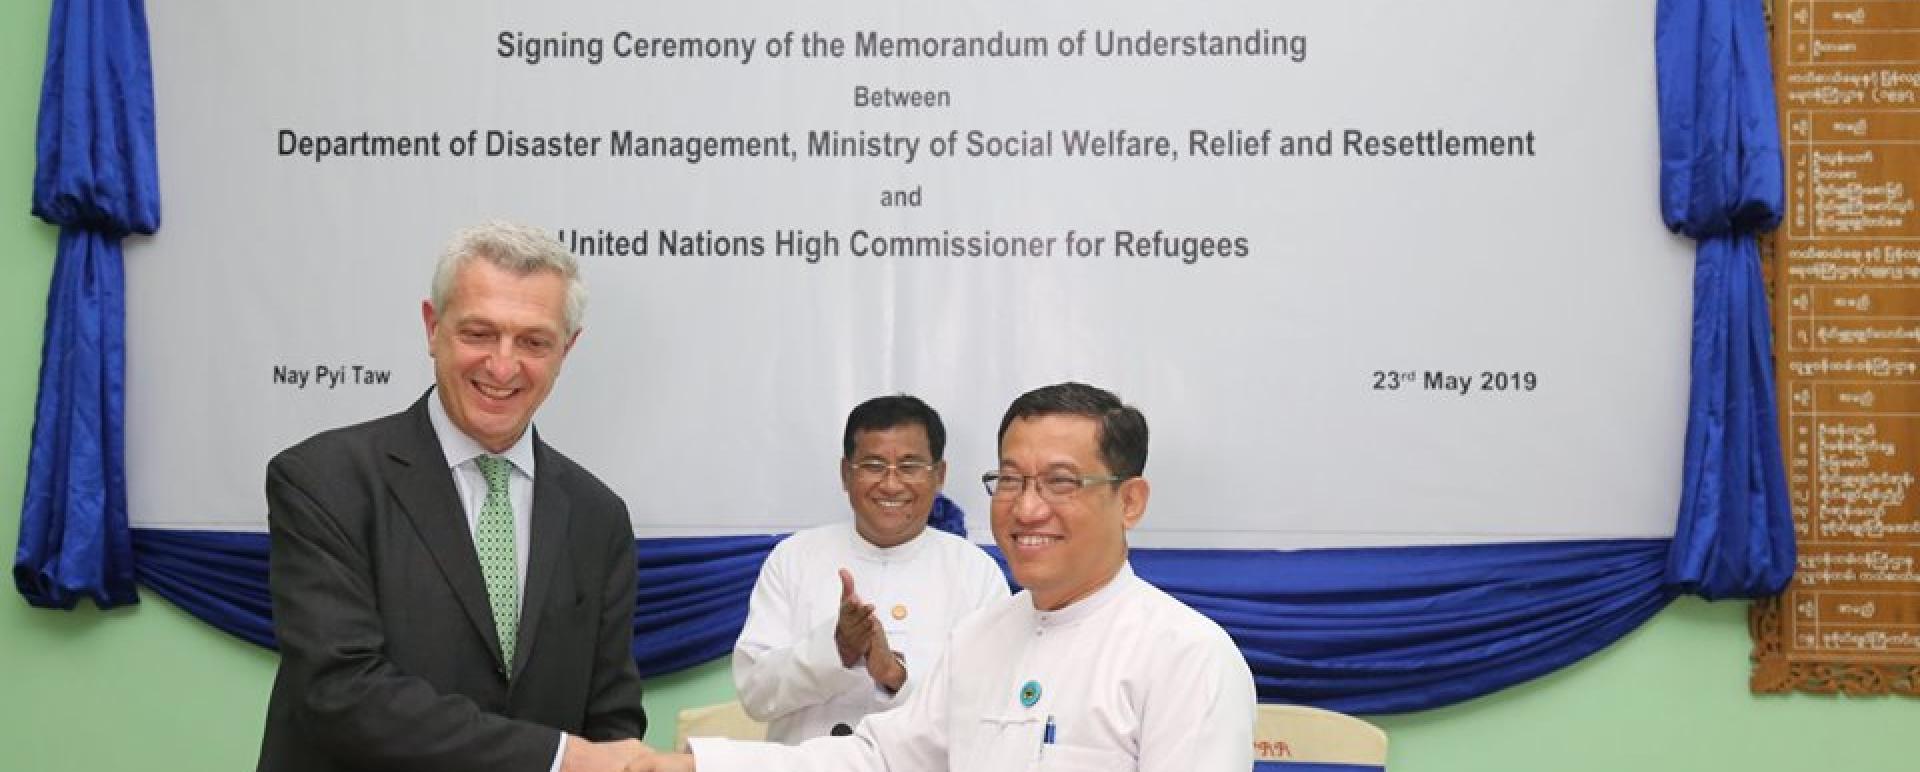 Filippo Grandi, UN High Commissioner for Refugees (left), exchanges the MoU with Dr.Ko Ko Naing, a director general at the Ministry of Social Welfare, Relief and Resettlement, in Nay Pyi Taw (Photo courtesy of Ministry of Social Welfare, Relief and Resettlement)